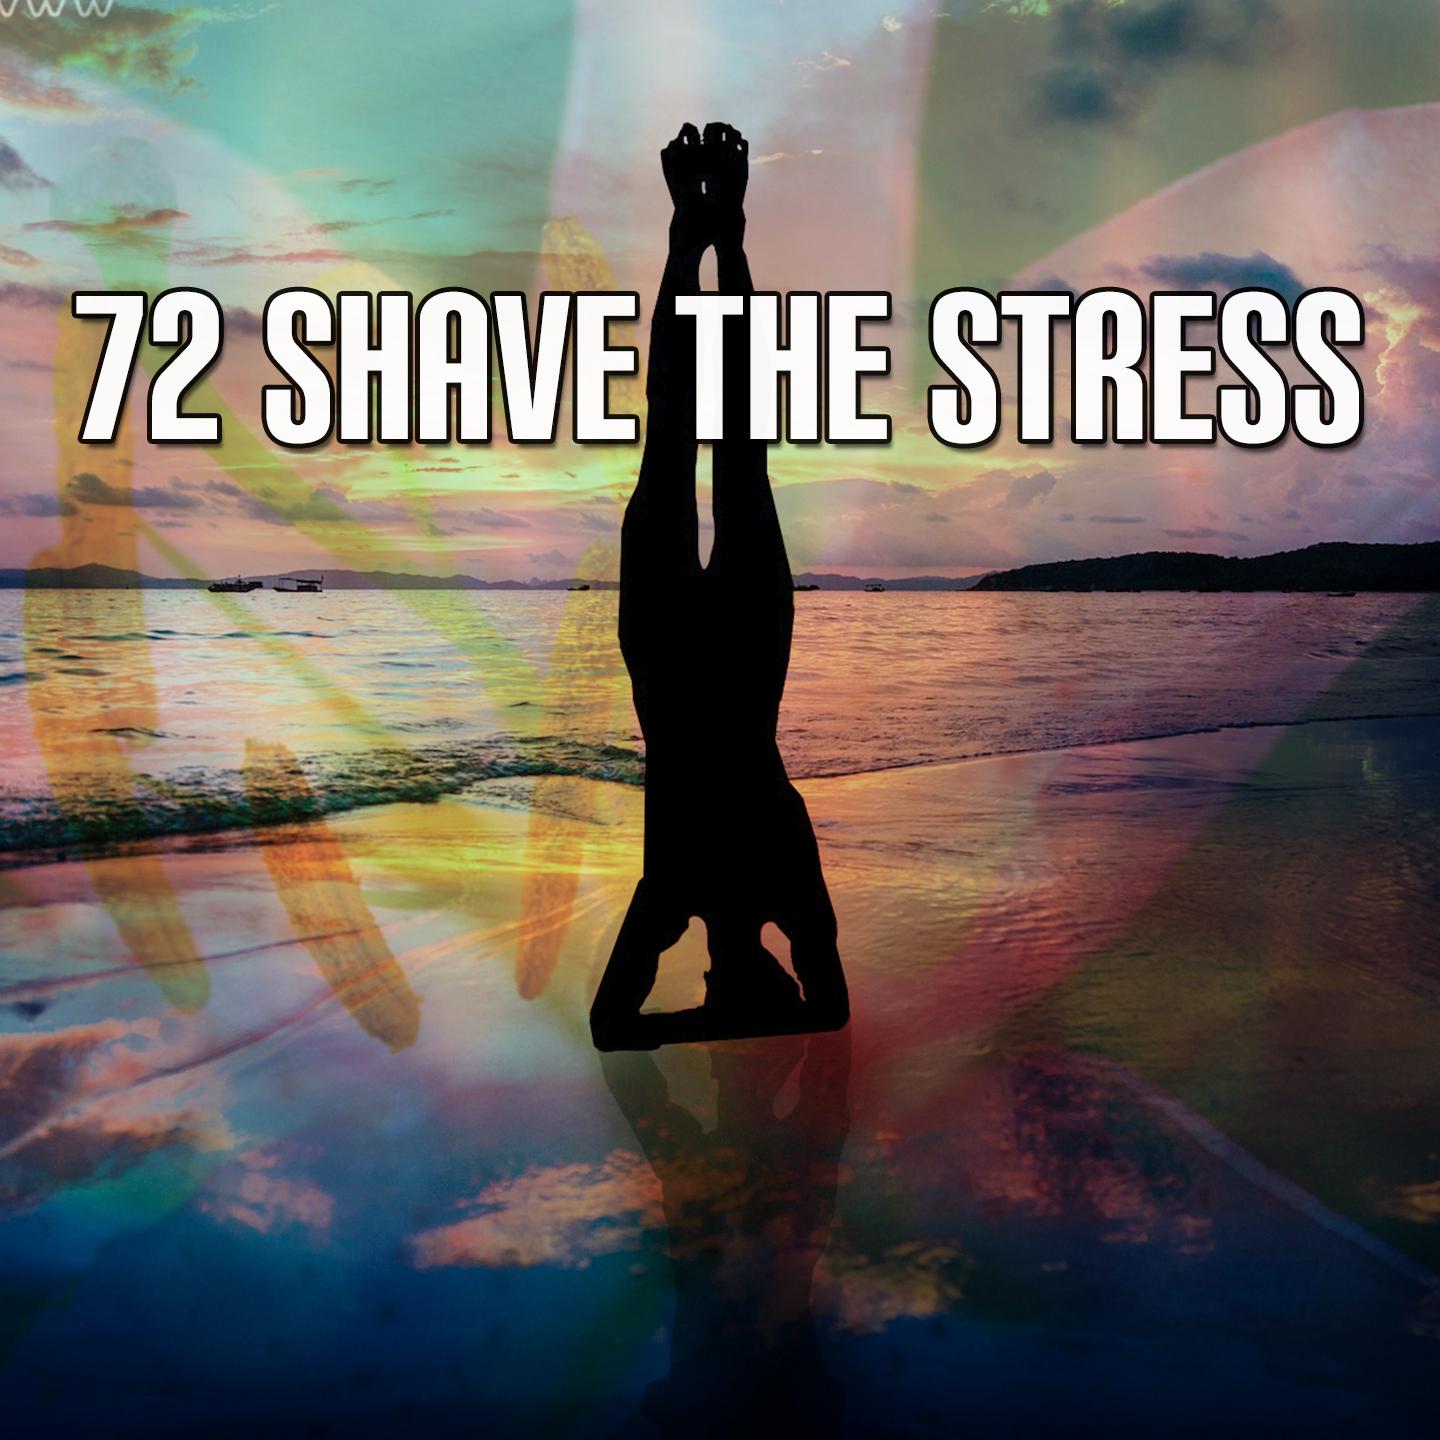 72 Shave The Stress